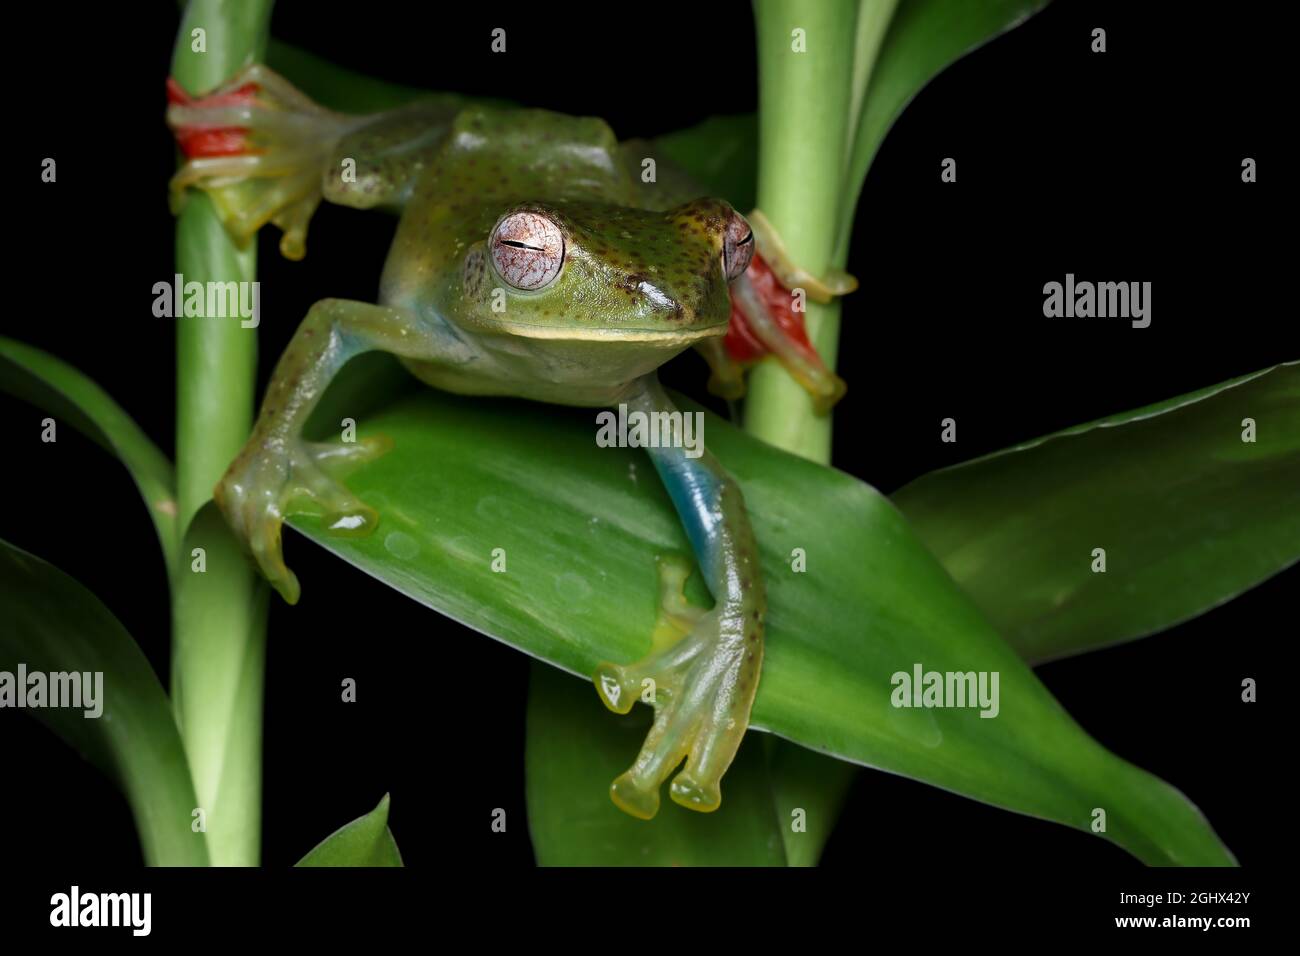 Malayan tree frog on a leaf, Indonesia Stock Photo